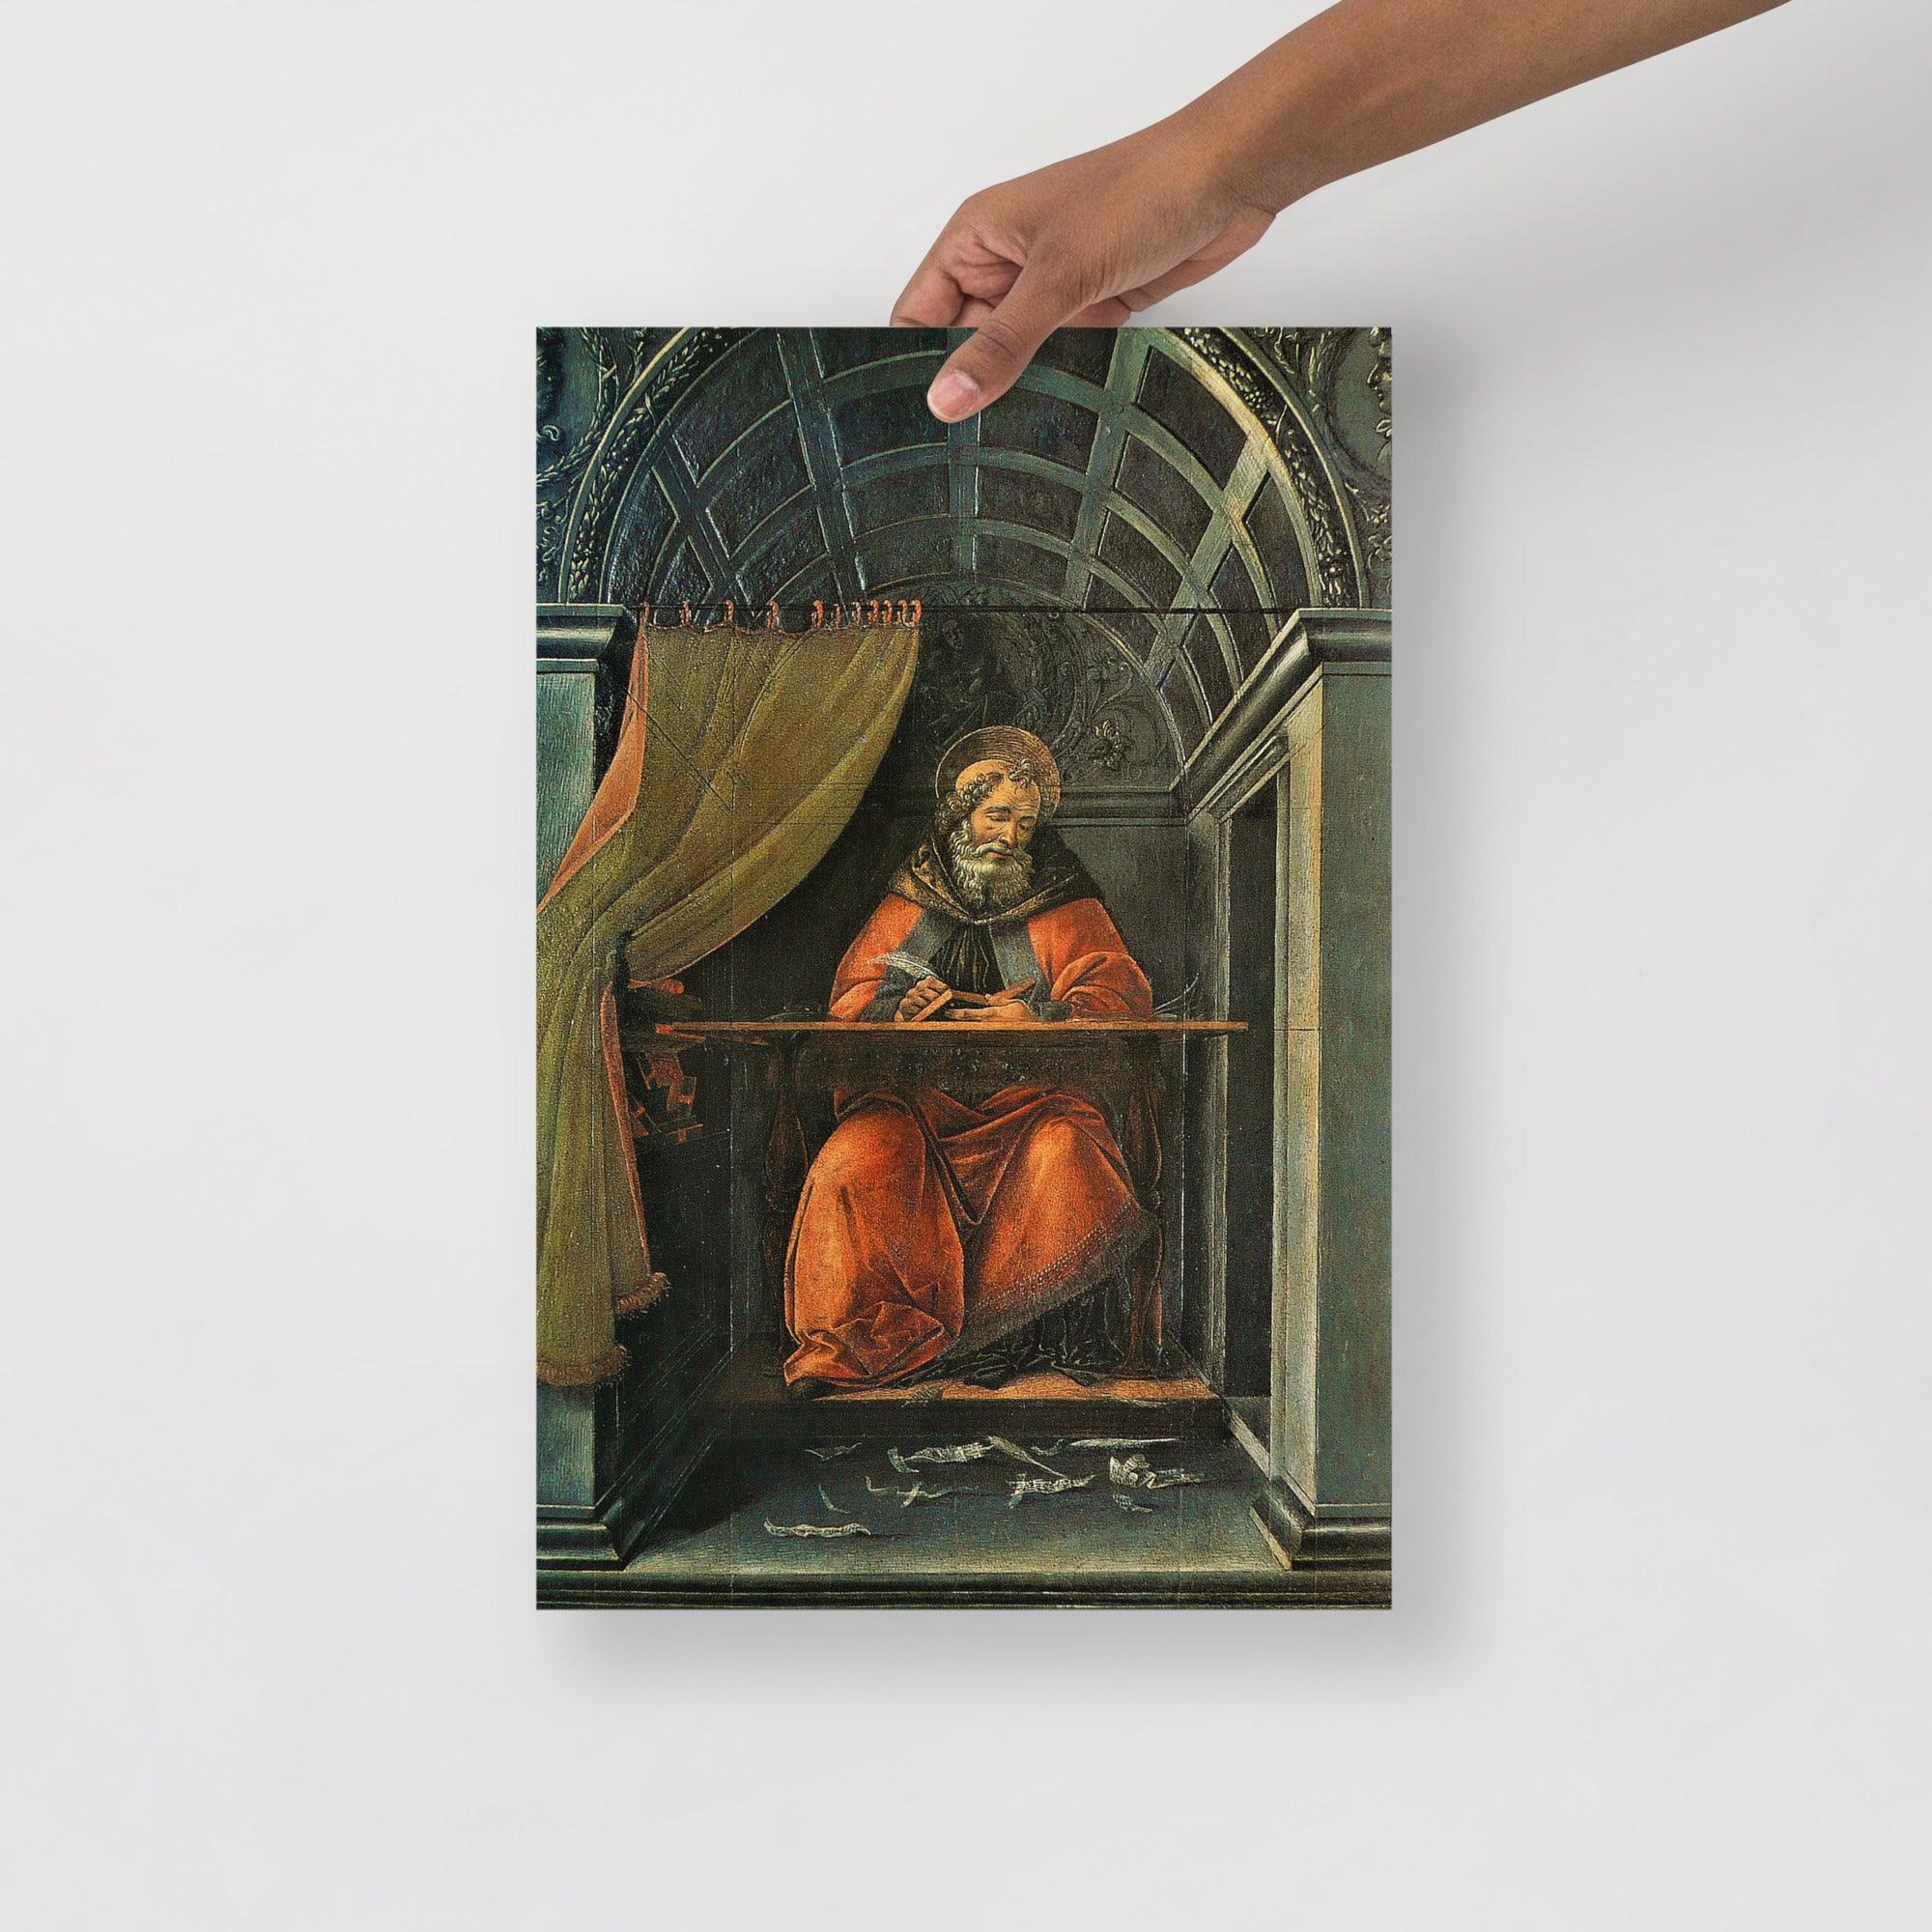 A St. Augustine in his Cell by Sandro Botticelli poster on a plain backdrop in size 12x18”.